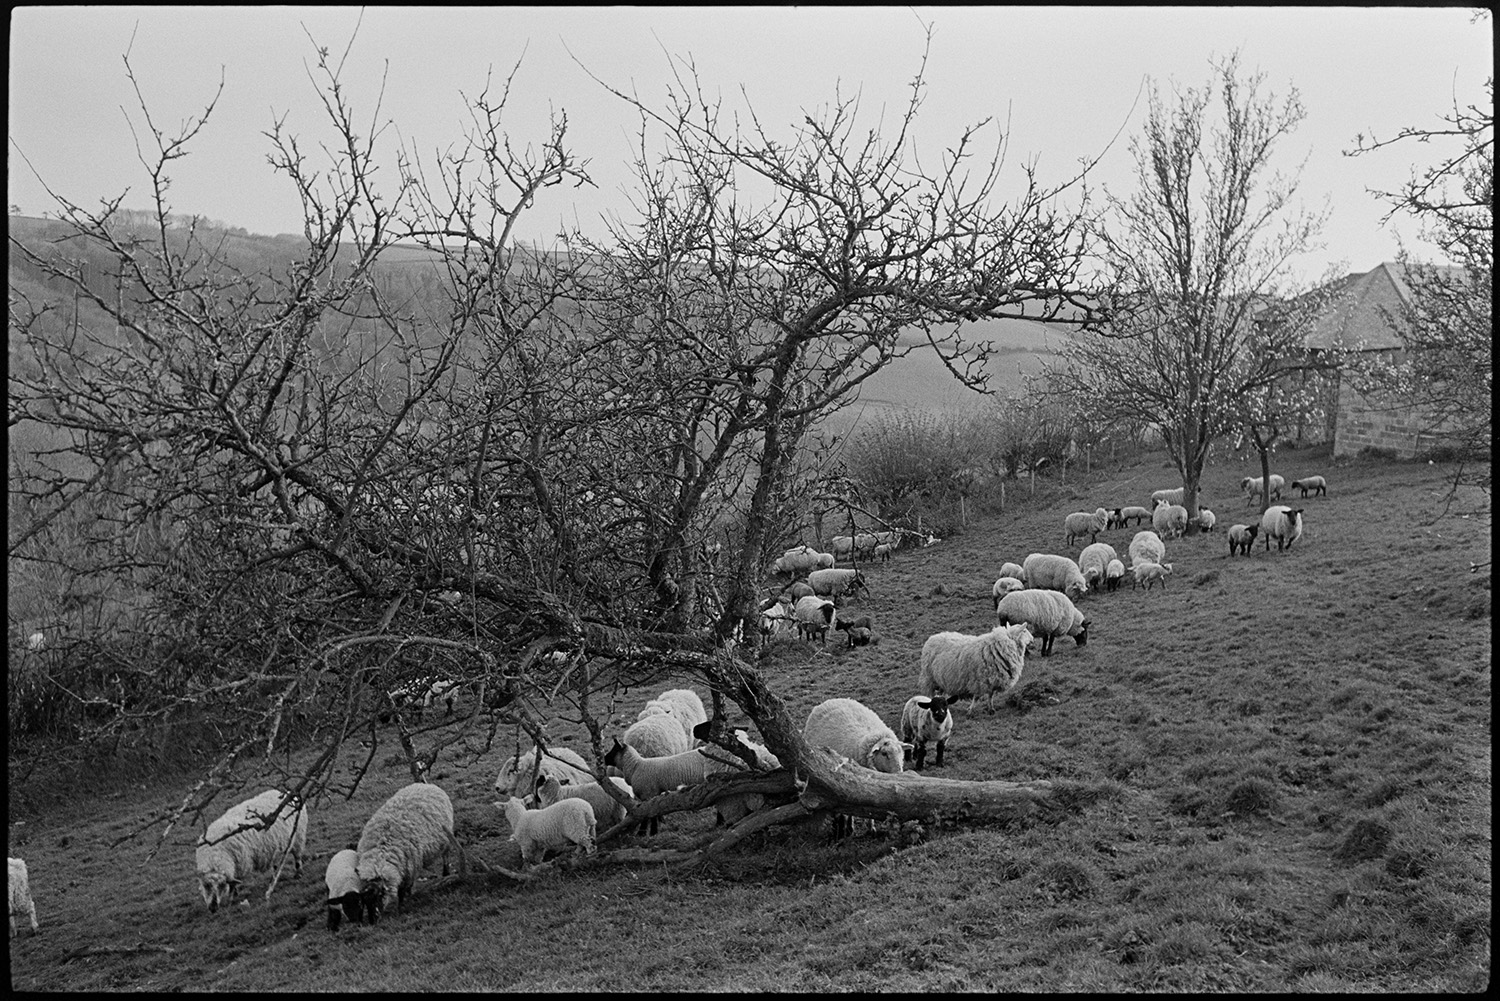 Orchards. Sheep in farm orchard.
[A flock of sheep with lambs grazing in an orchard at Sydham, Chulmleigh.]